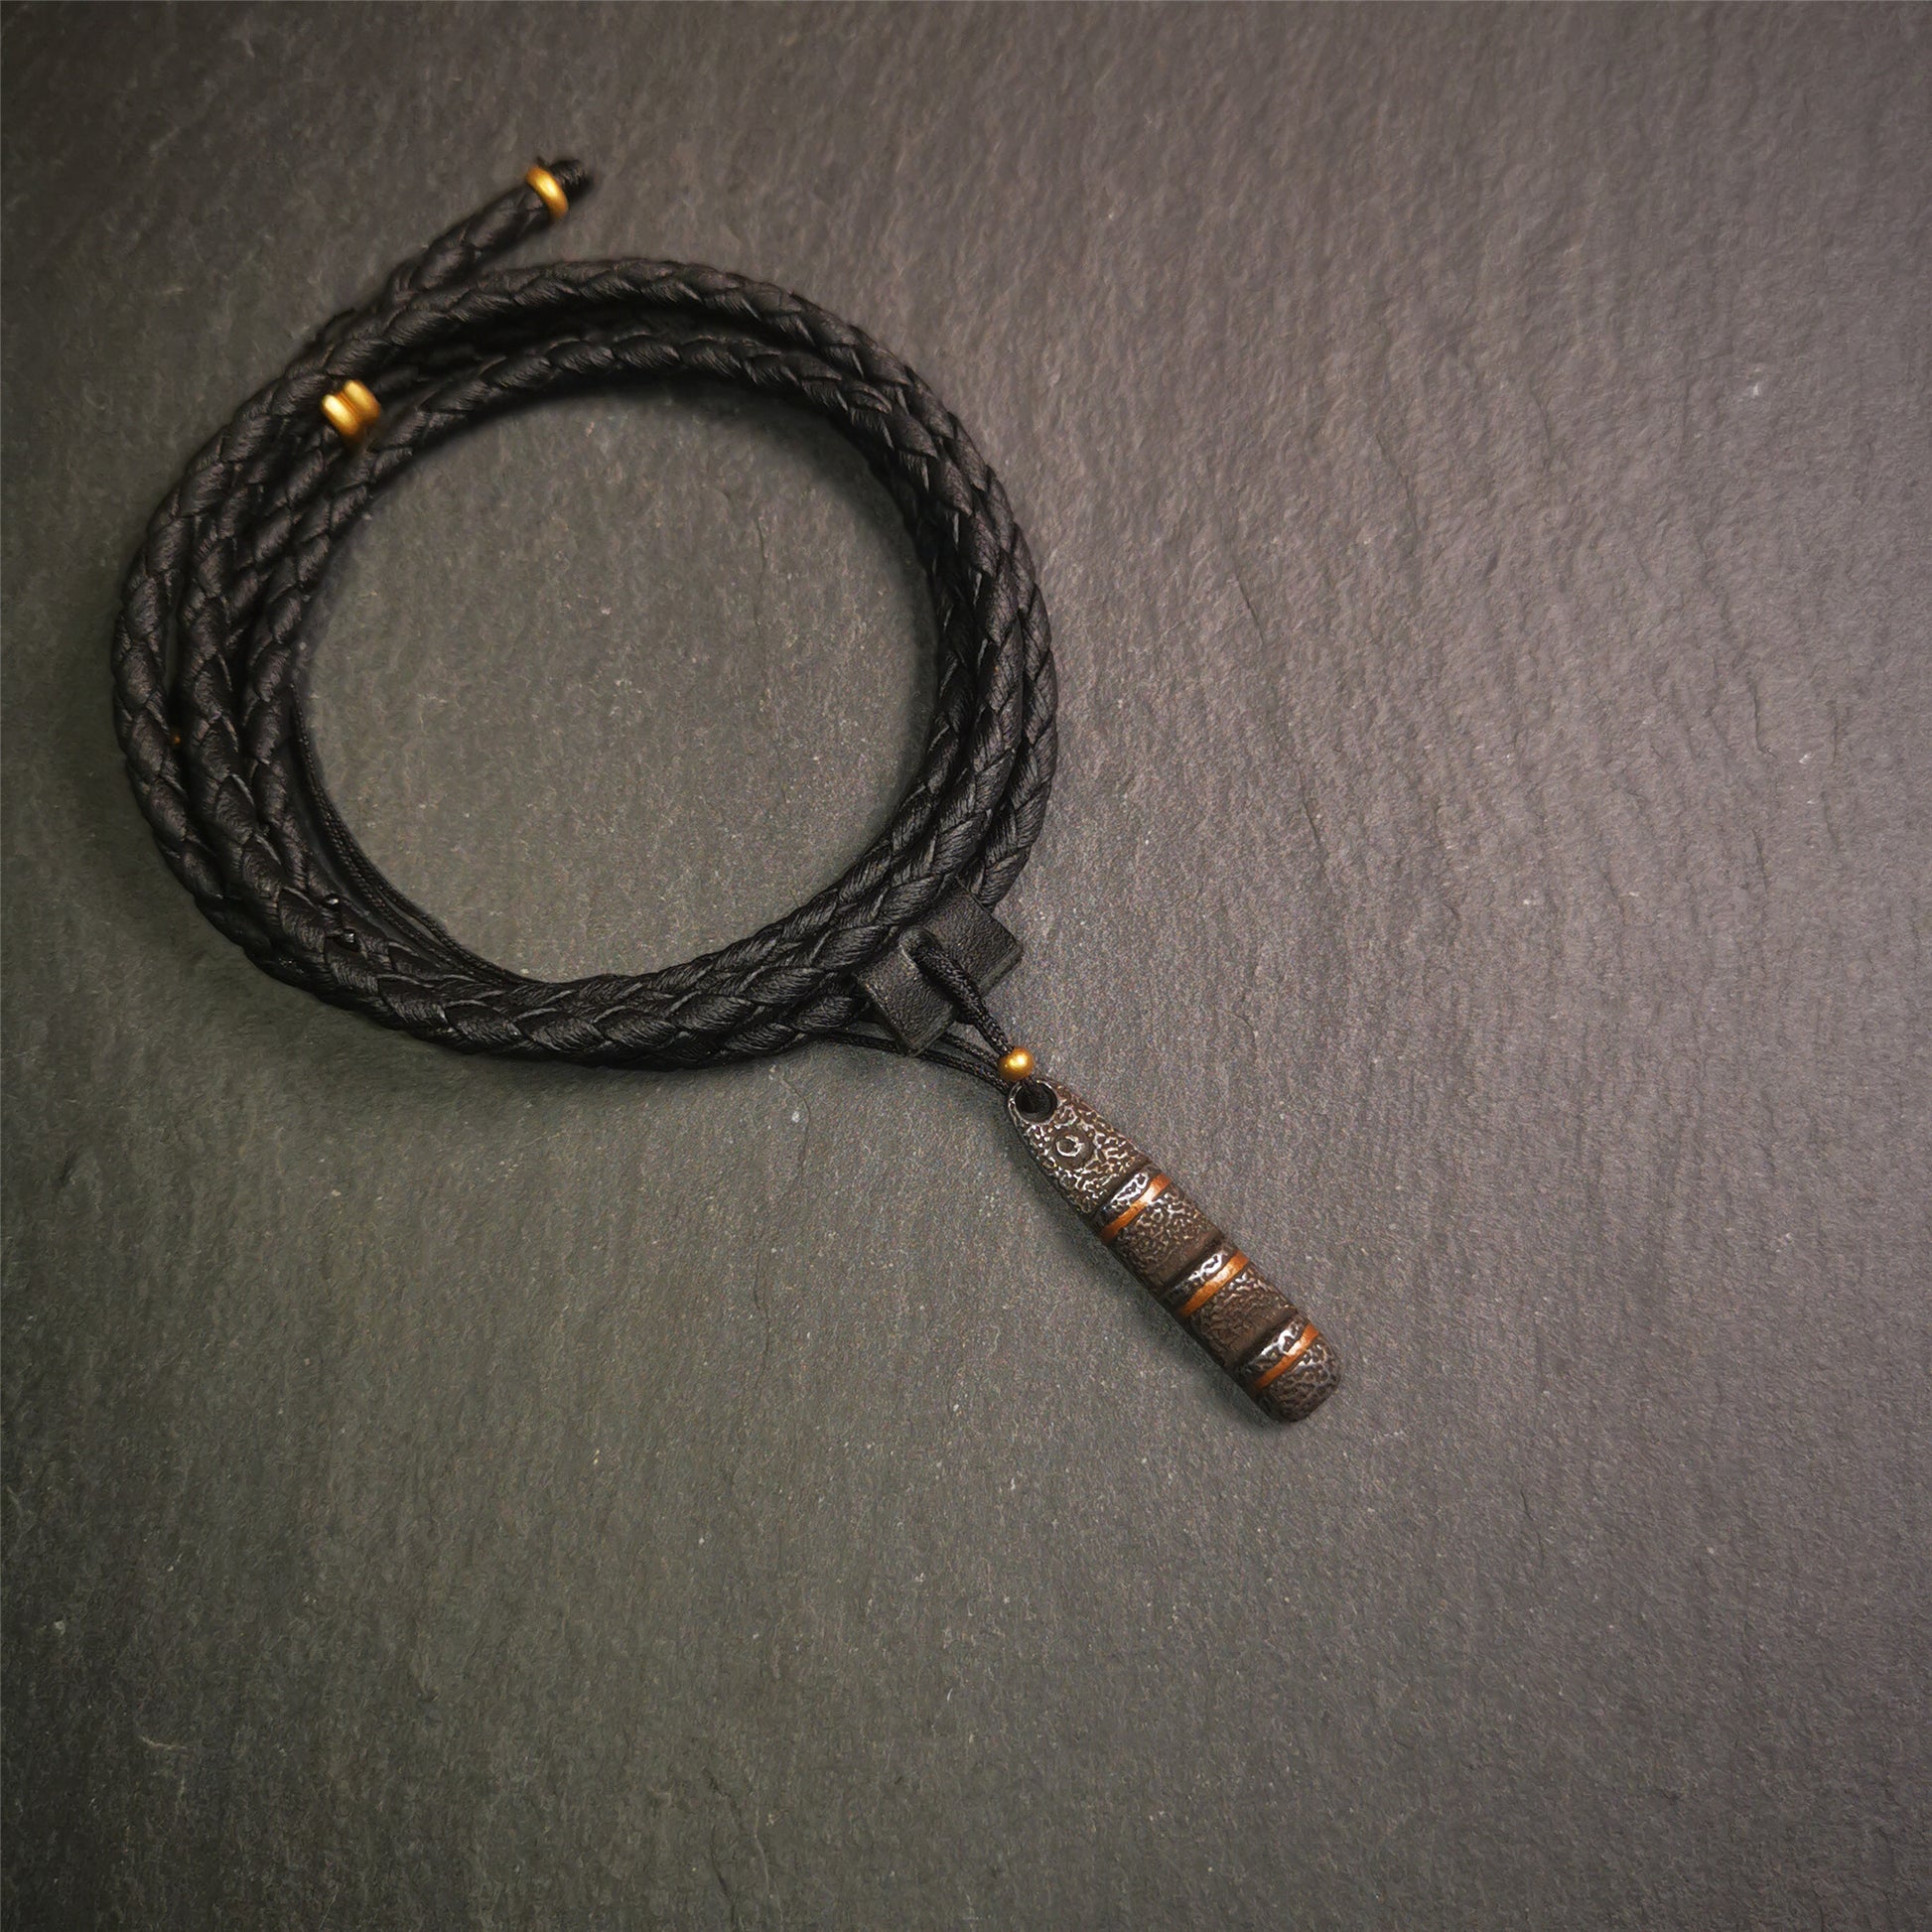 This unique Ladder pendant is made by Tibetan craftsmen. It is made of cold iron and copper, black color,the shape is Tibetan Ladder of Heaven,length is 32mm. You can make it into a pendant,keychain, or just put it on your desk,as an ornament.